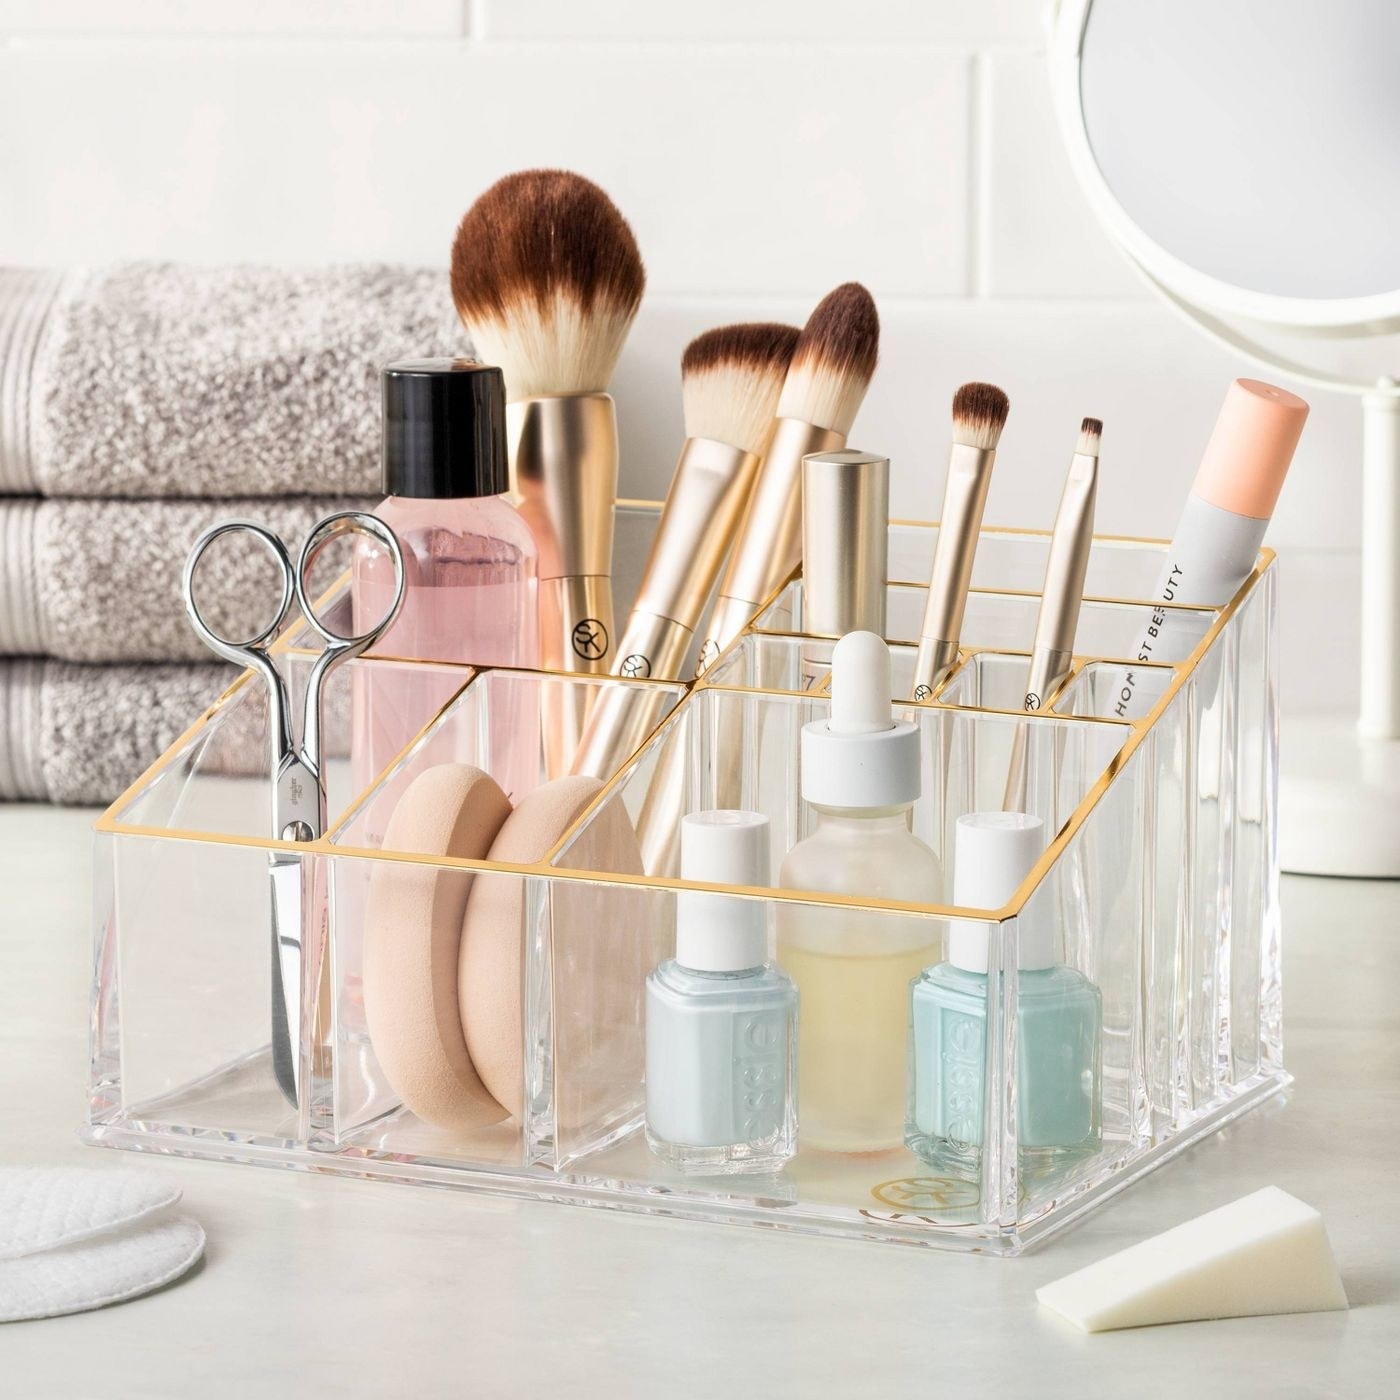 the clear and gold organizer full of makeup